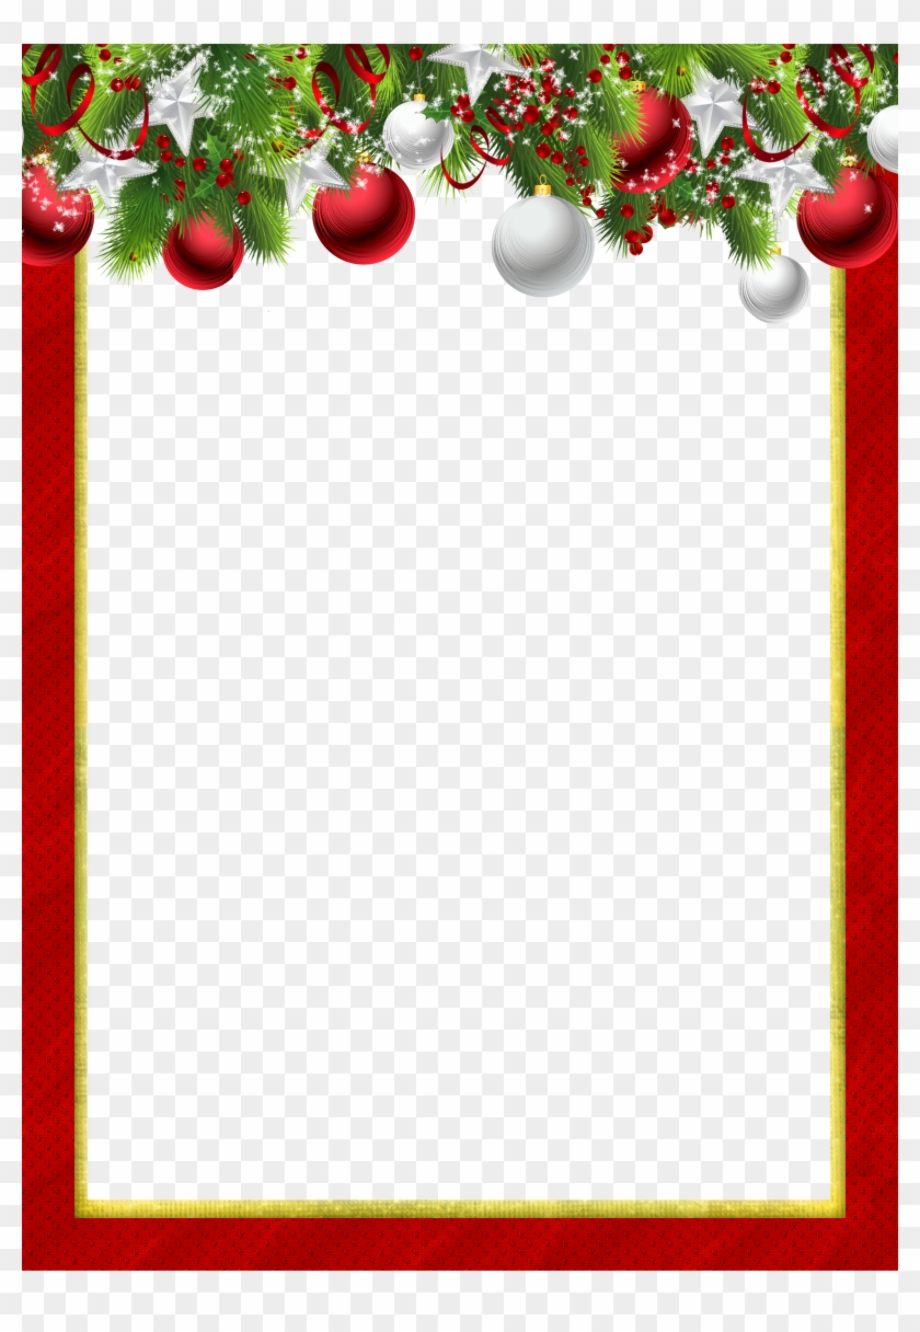 Download High Quality free christmas clipart frame Transparent PNG ...